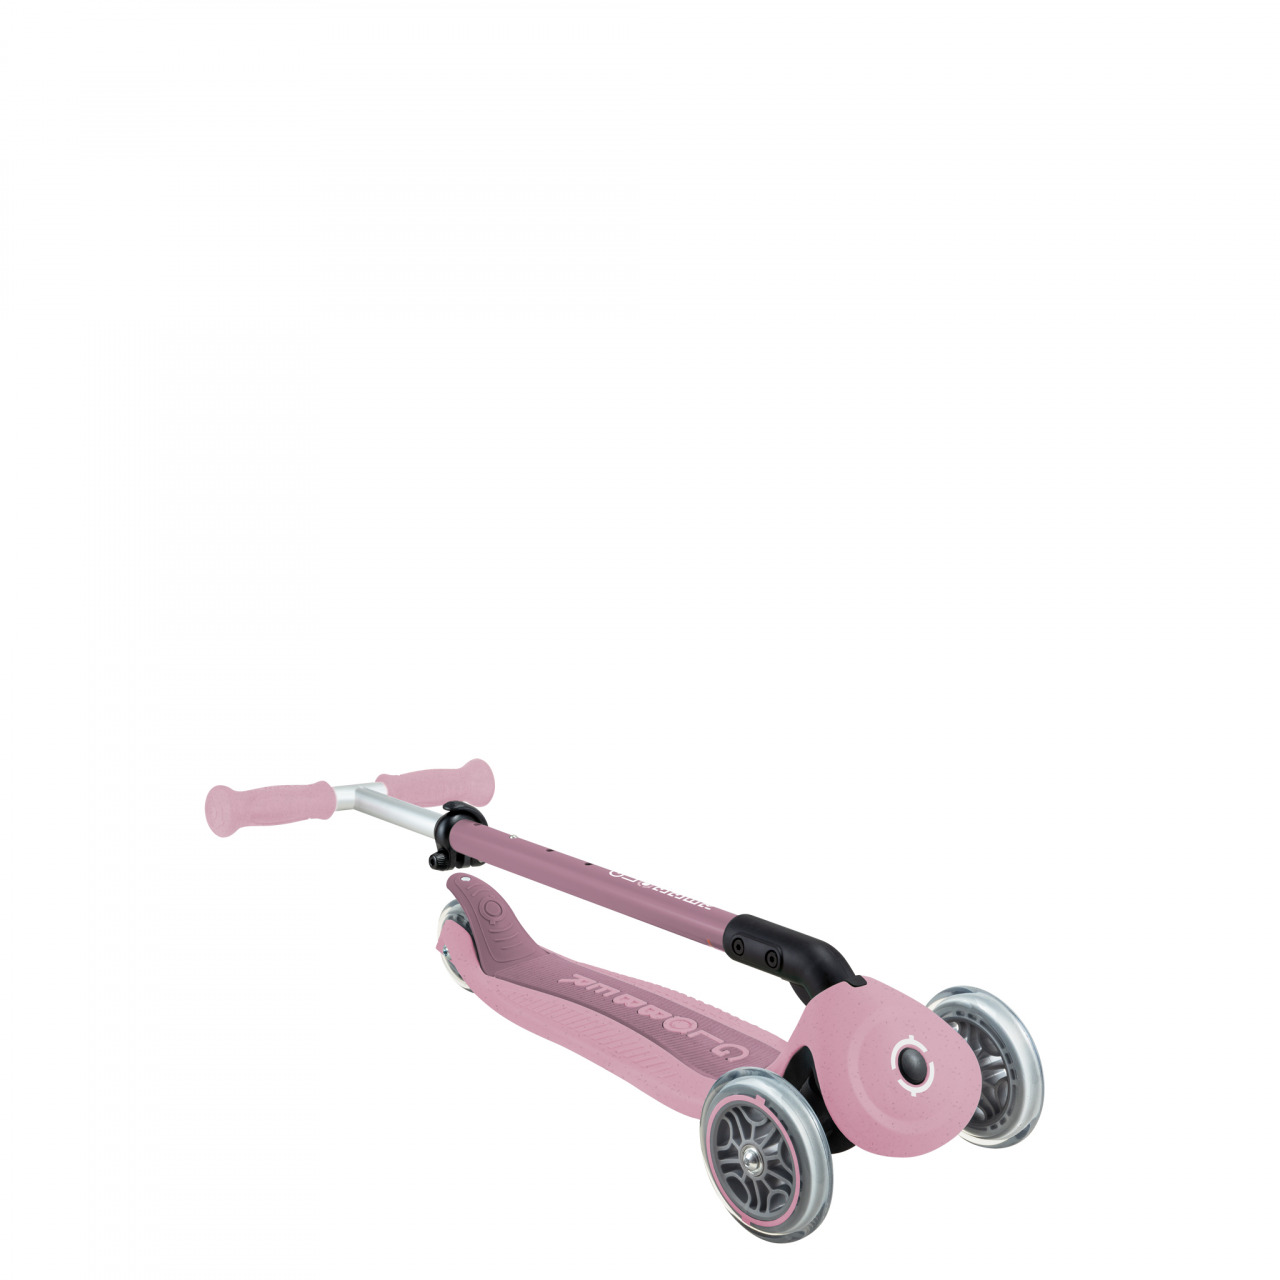 740 510 Foldable Eco Scooter